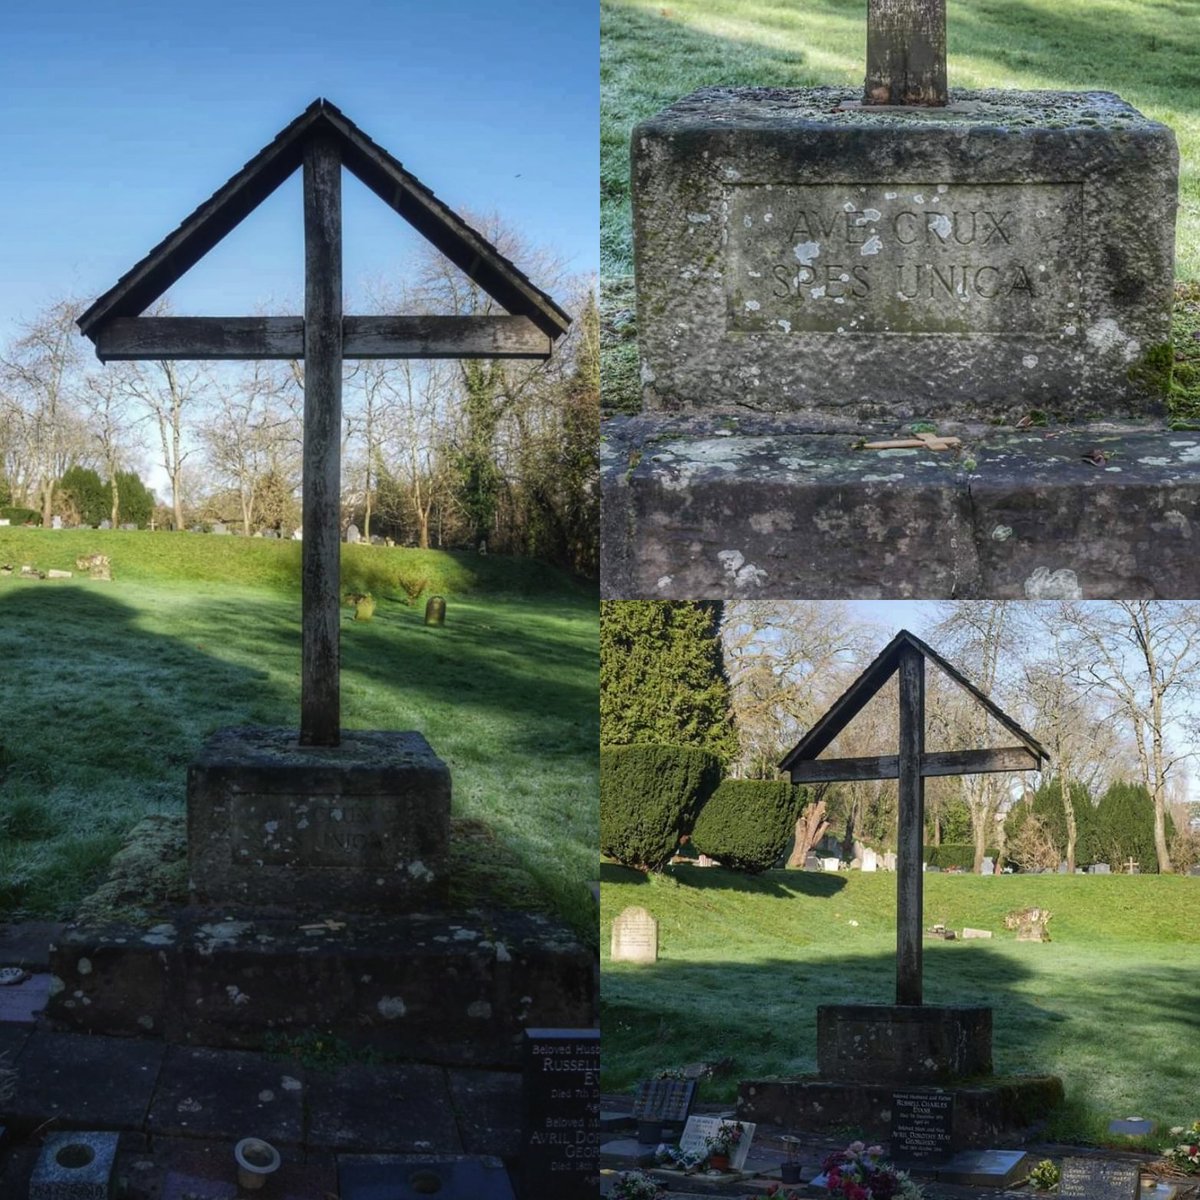 The Pauper Cross • Monmouth Cemetery. This cross was erected to commemorate the unmarked graves of those who died in Monmouth Union Workhouse. It is inscribed in Latin with 'Ave Crux Spes Unica' meaning 'Hail, O Cross, Our Only Hope'. #Wales  #History